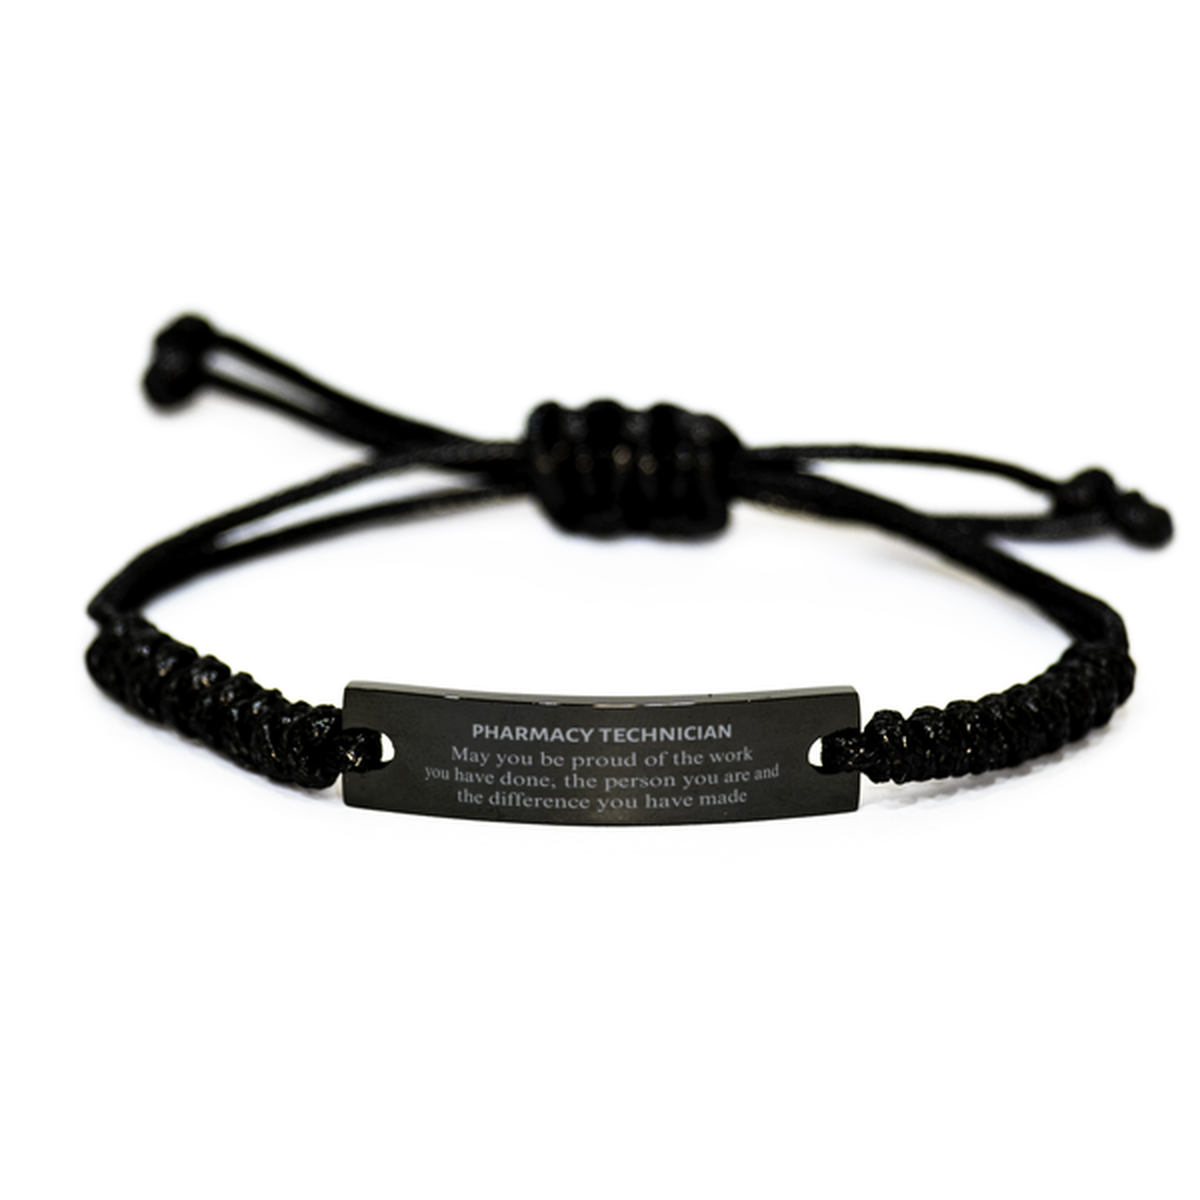 Pharmacy Technician May you be proud of the work you have done, Retirement Pharmacy Technician Black Rope Bracelet for Colleague Appreciation Gifts Amazing for Pharmacy Technician